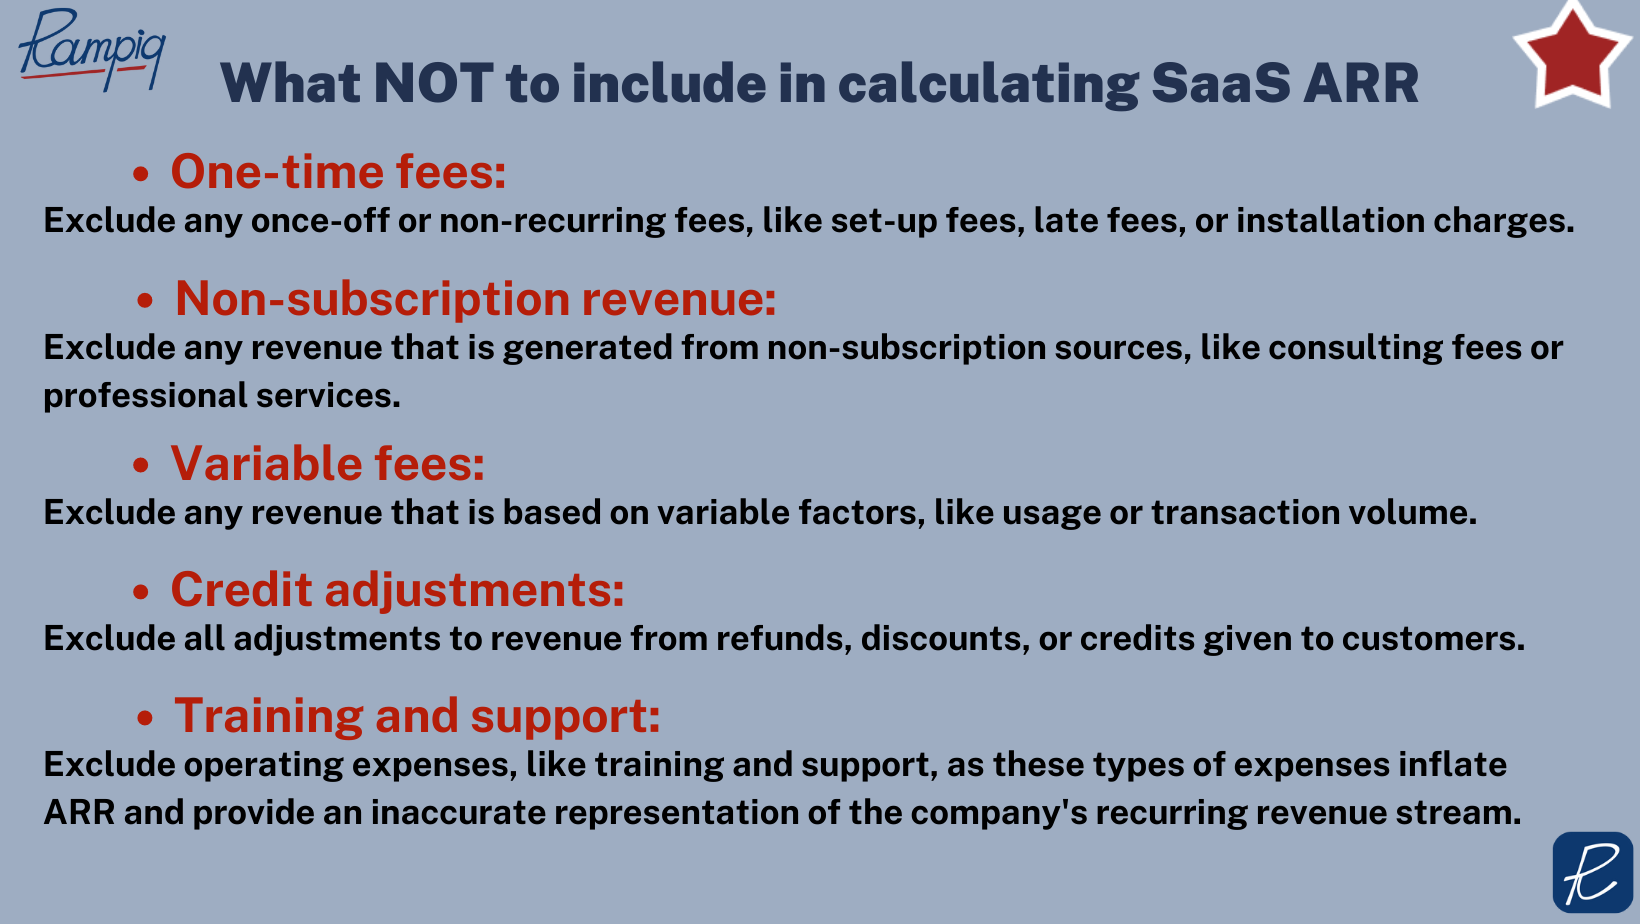 What NOT to include in calculating SaaS ARR